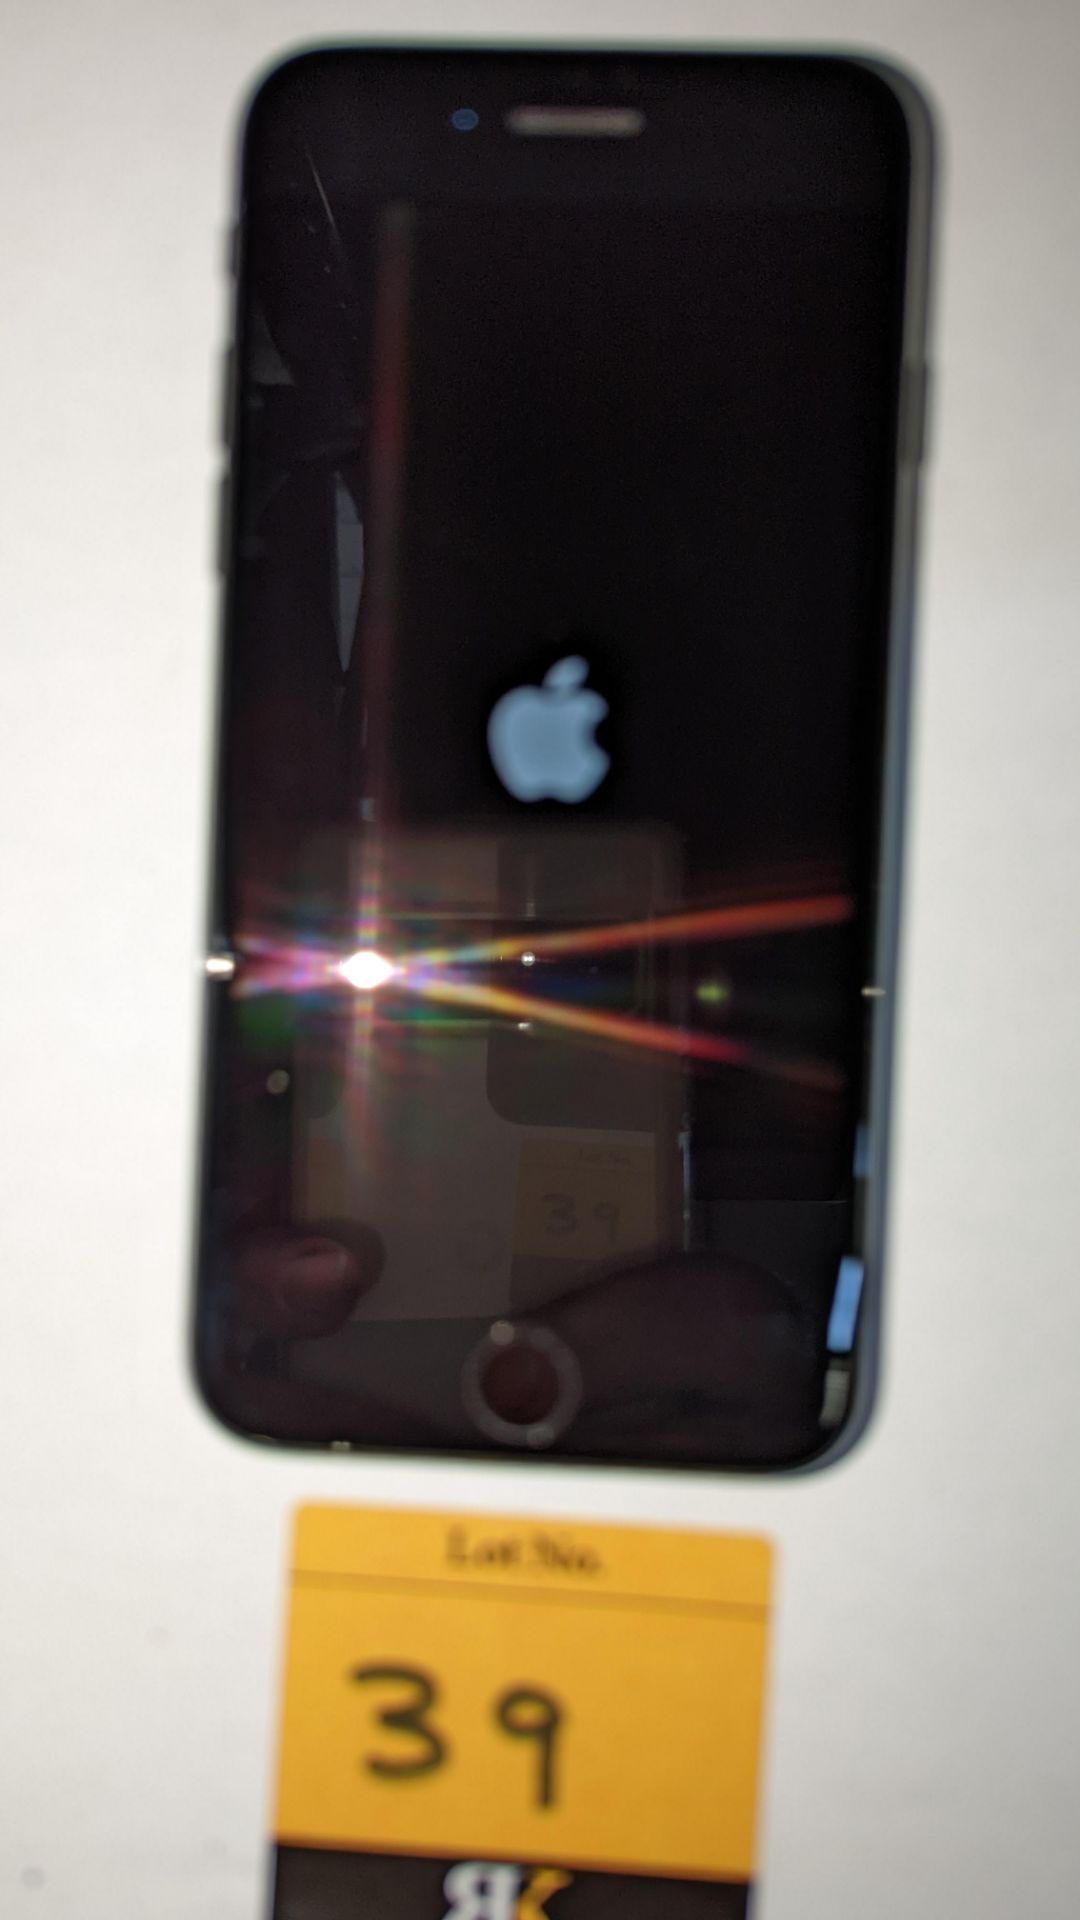 Apple iPhone 7, 32GB capacity, model A1778. No ancillaries or accessories - Image 10 of 11